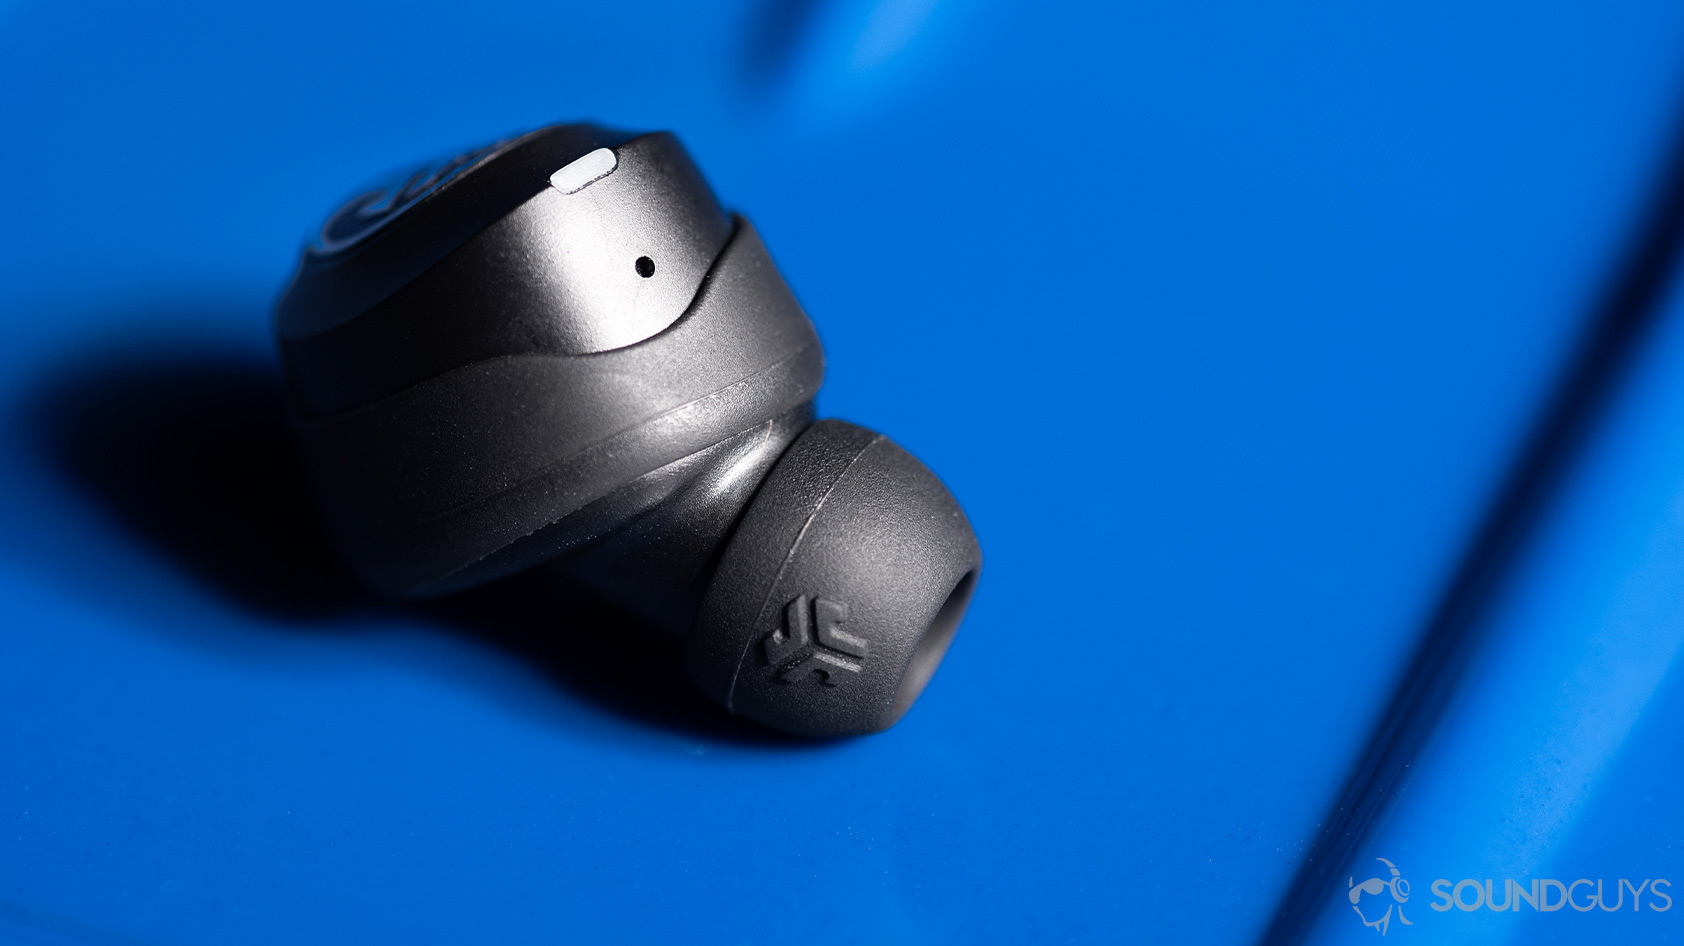 A macro picture of the JLab JBuds Air Icon true wireless earbuds' microphone hole and silicone wing tip.